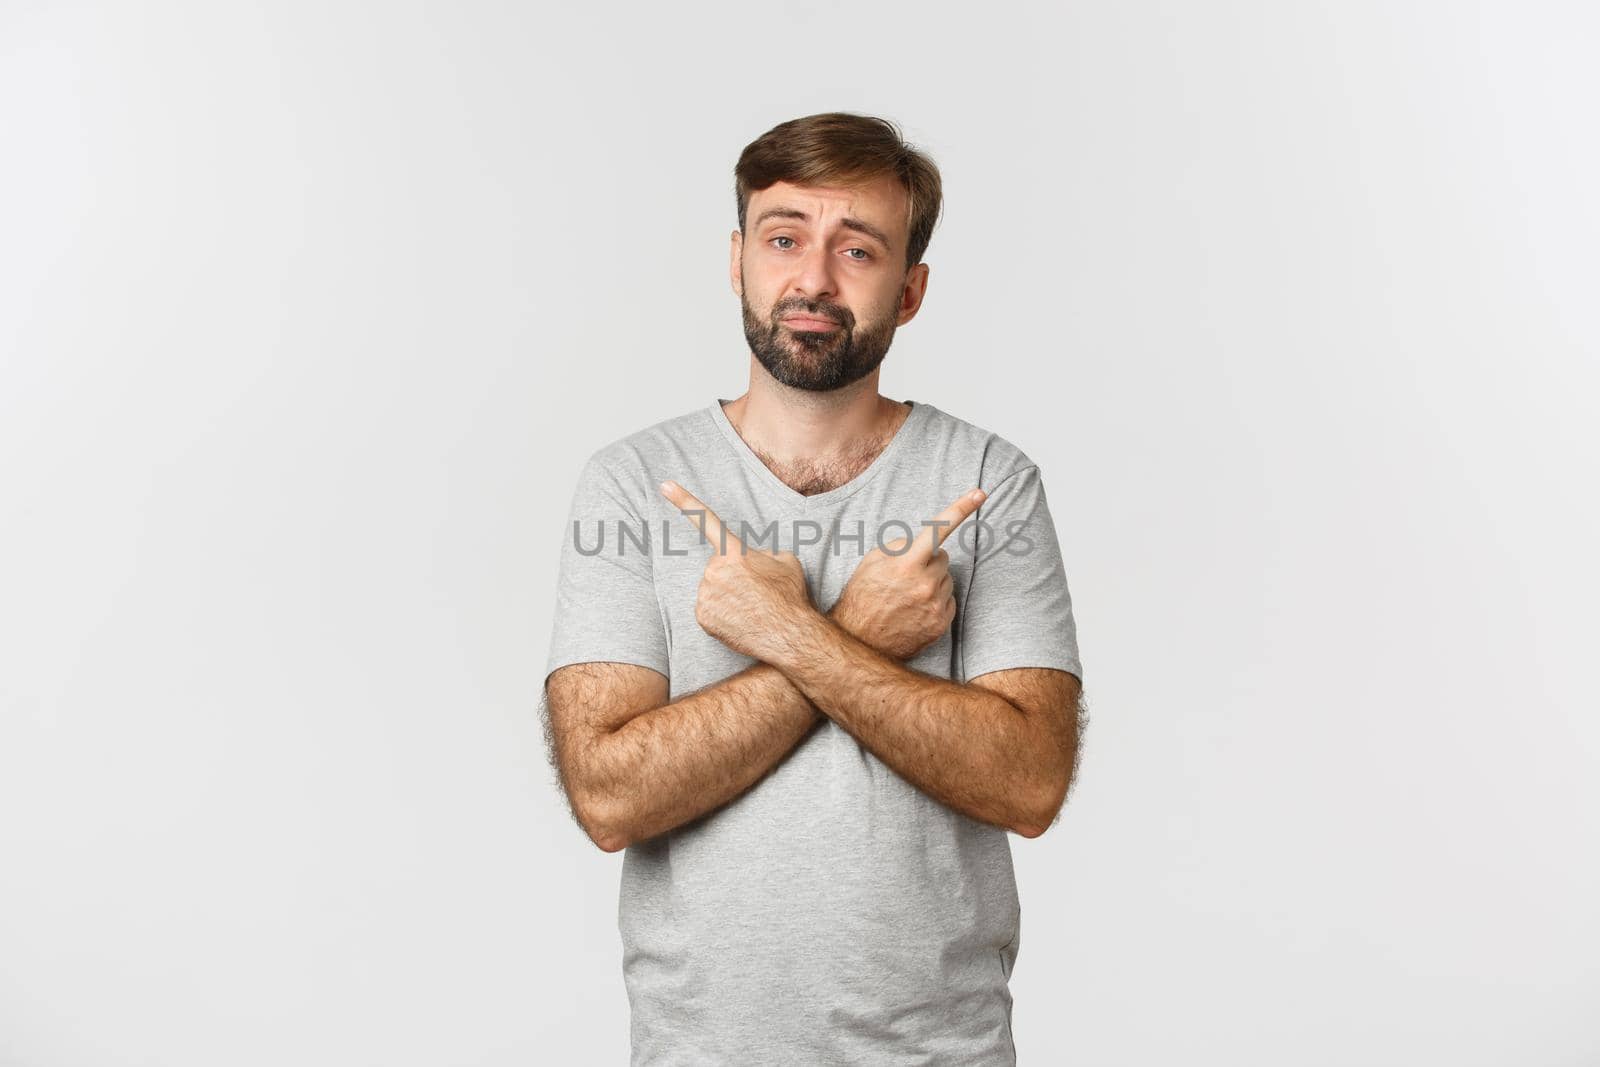 Portrait of sad and confused bearded guy in gray casual t-shirt, pointing fingers sideways, showing left and right promo, standing over white background.